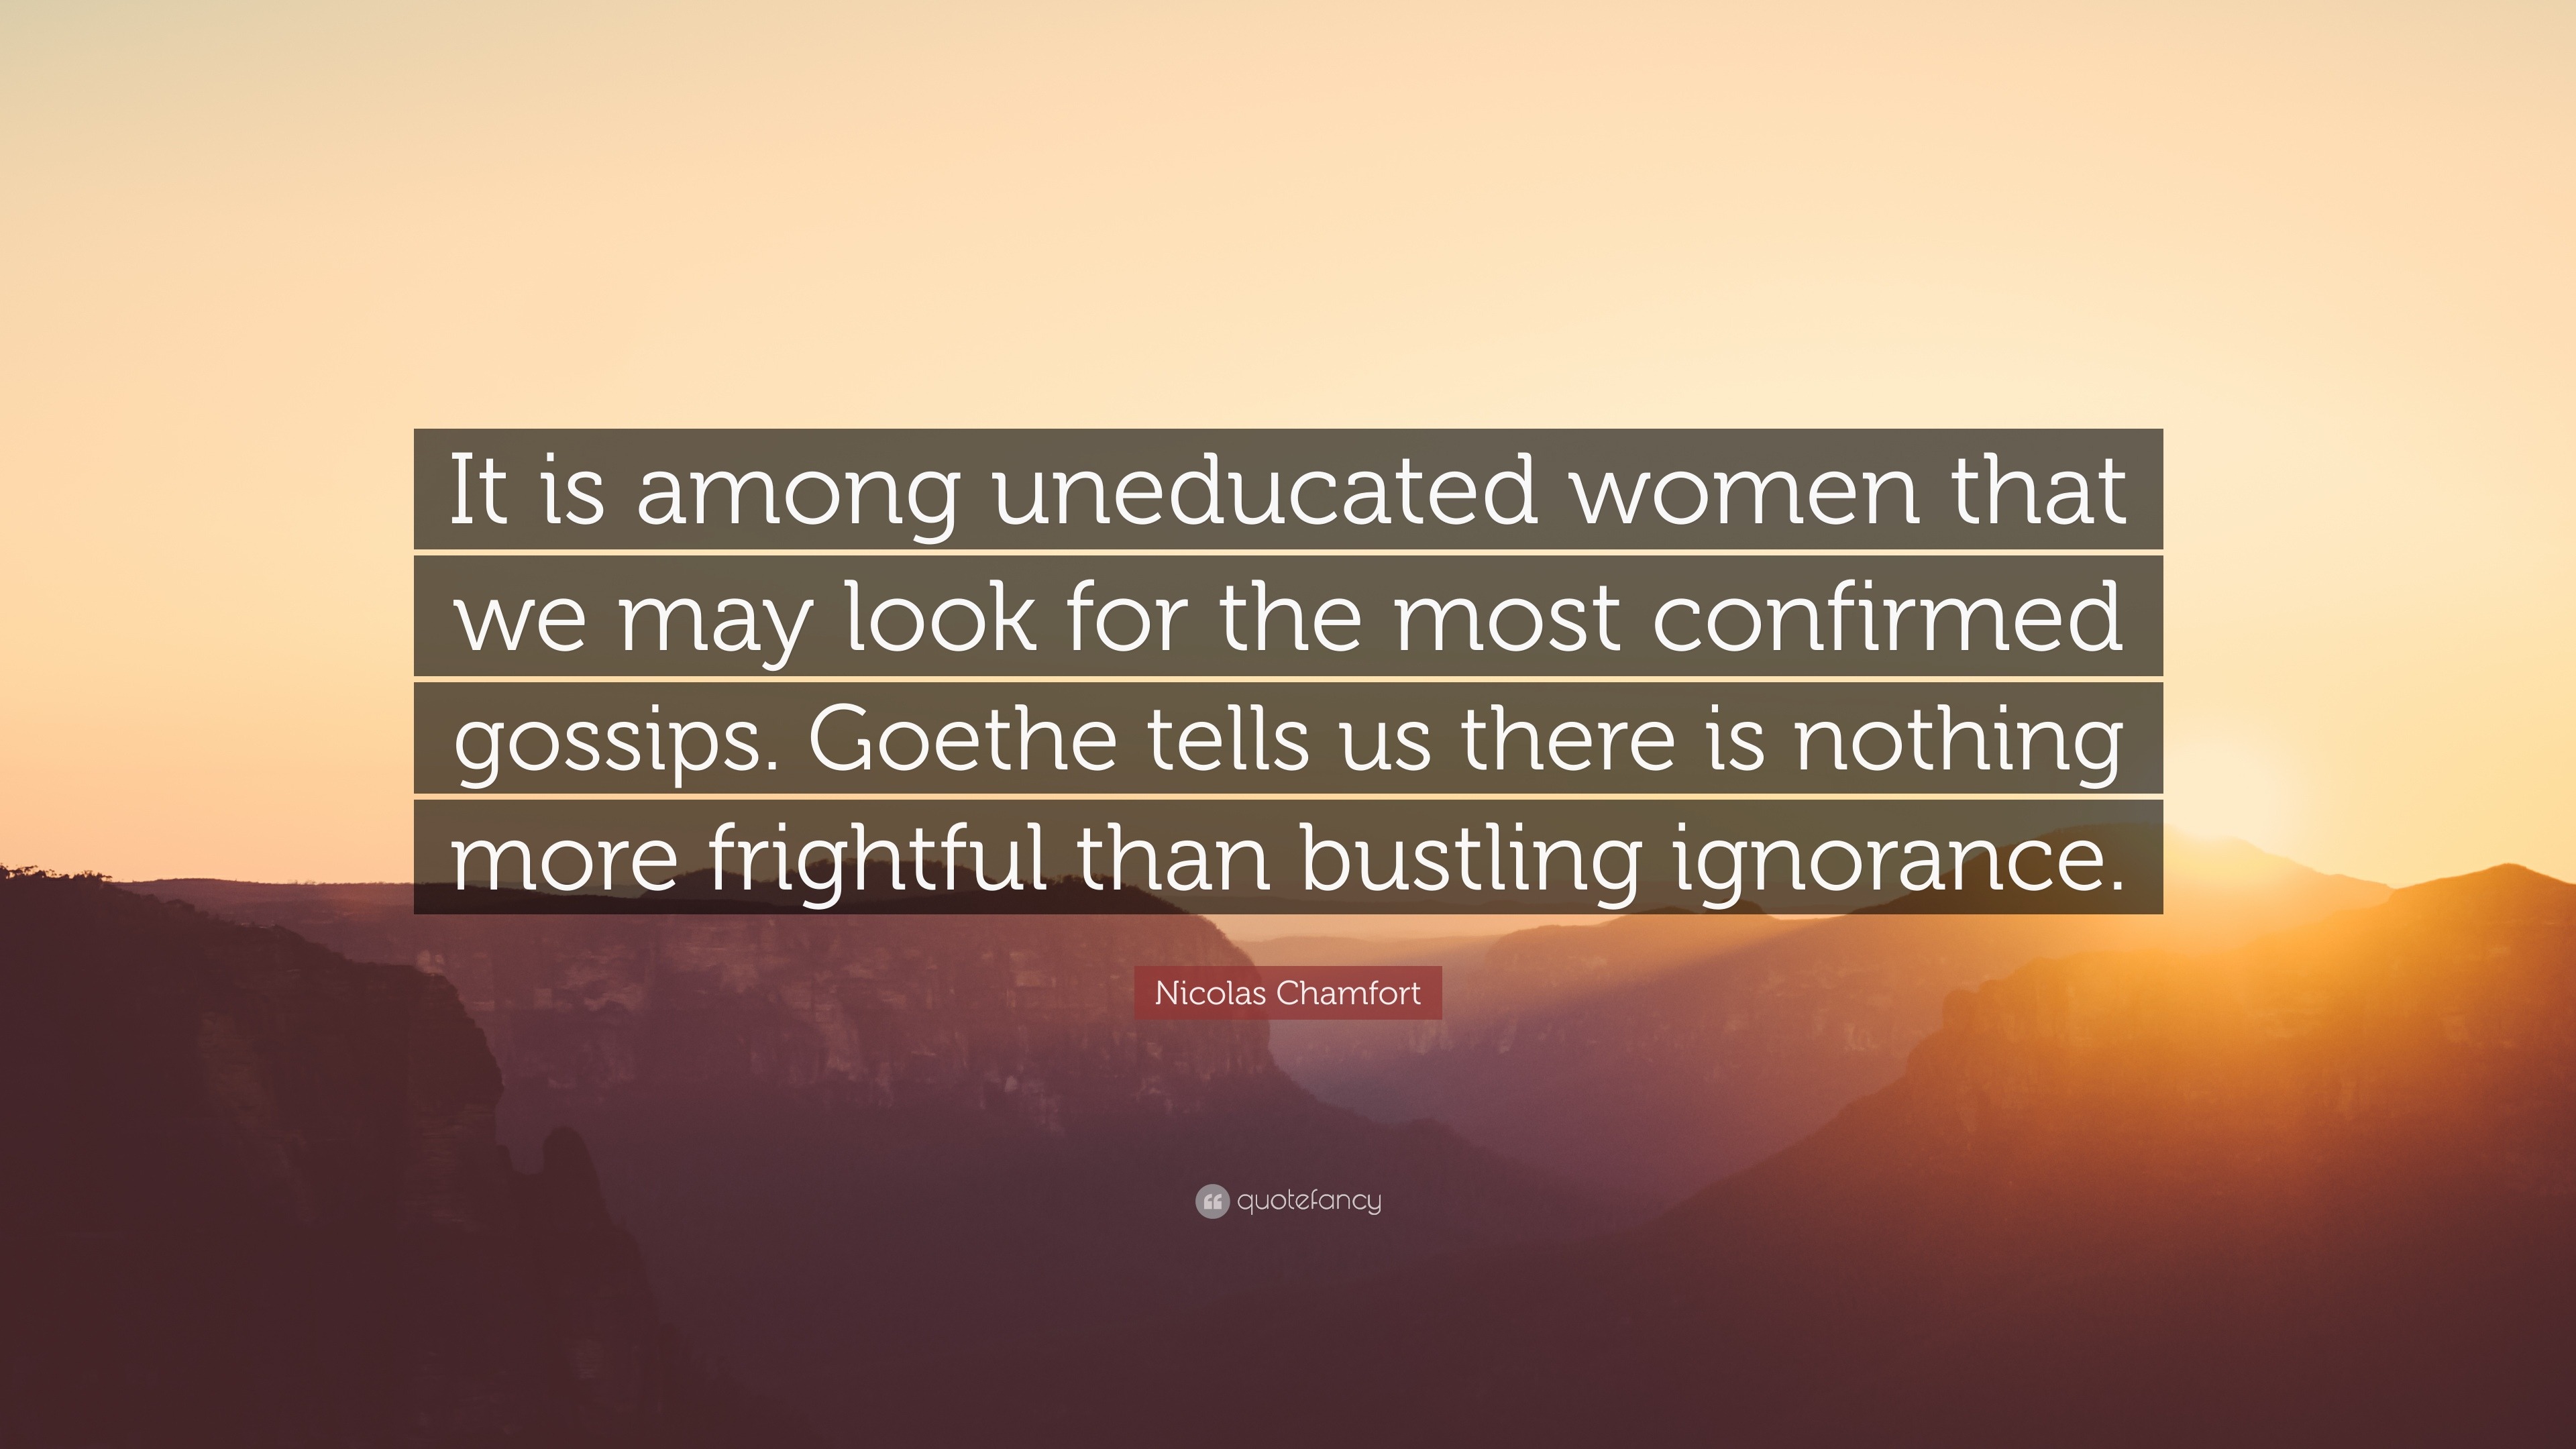 ignorant quotes about women